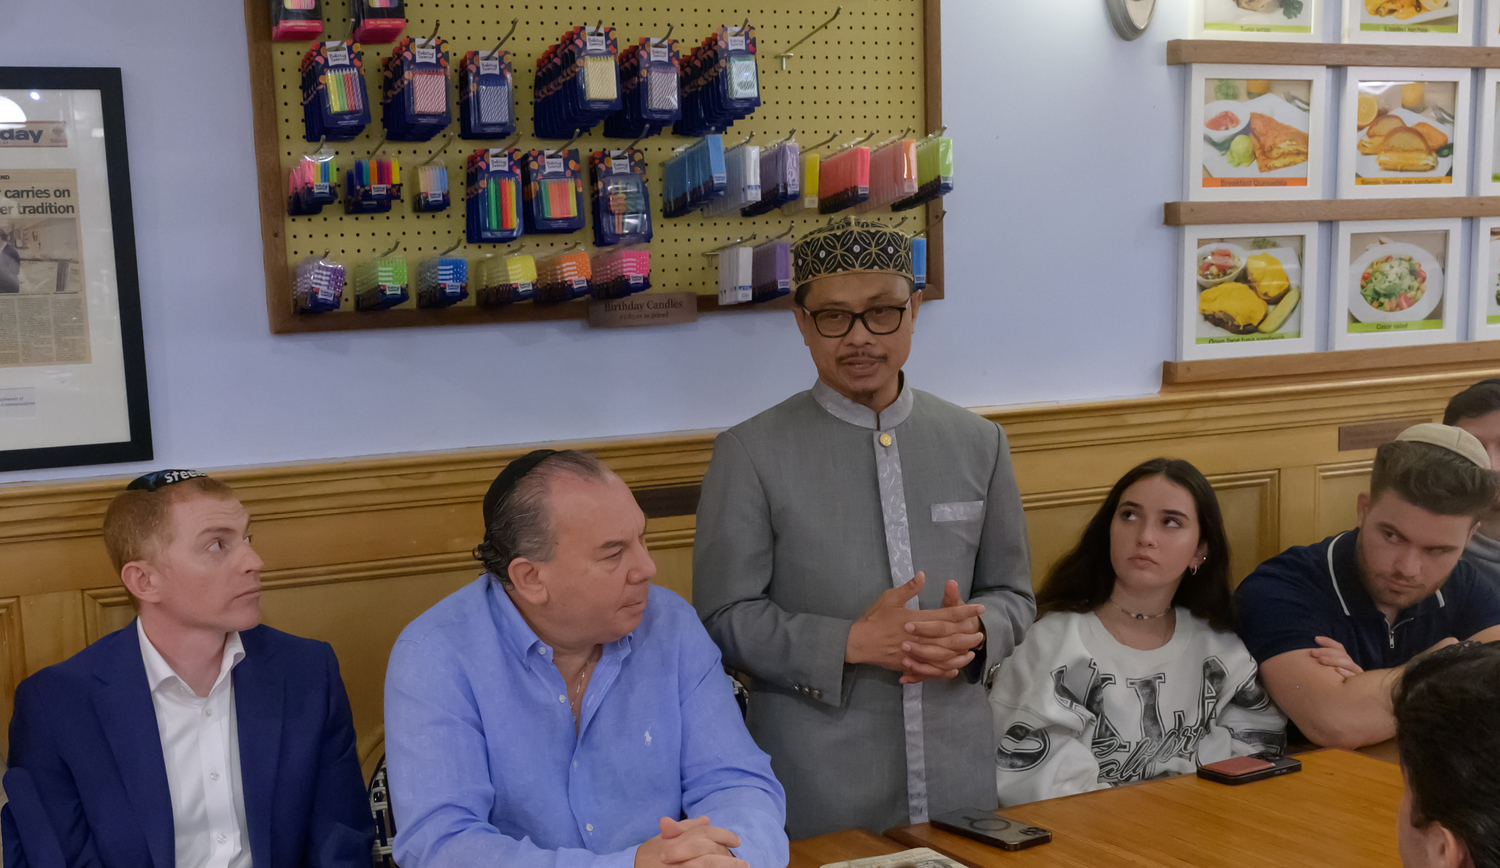 Rabbi Marc Schneier of Hampton Synagogue and Imam Shamsi Ali of the Jamaican Muslim Center in Queens met with 30 Jewish student leaders over the weekend at Beach Bakery in Westhampton Beach to discuss ways to combat hatred, violence and anti-Semitism that has been on the rise against the backdrop of the war in Gaza. RICK SEIGLEMAN